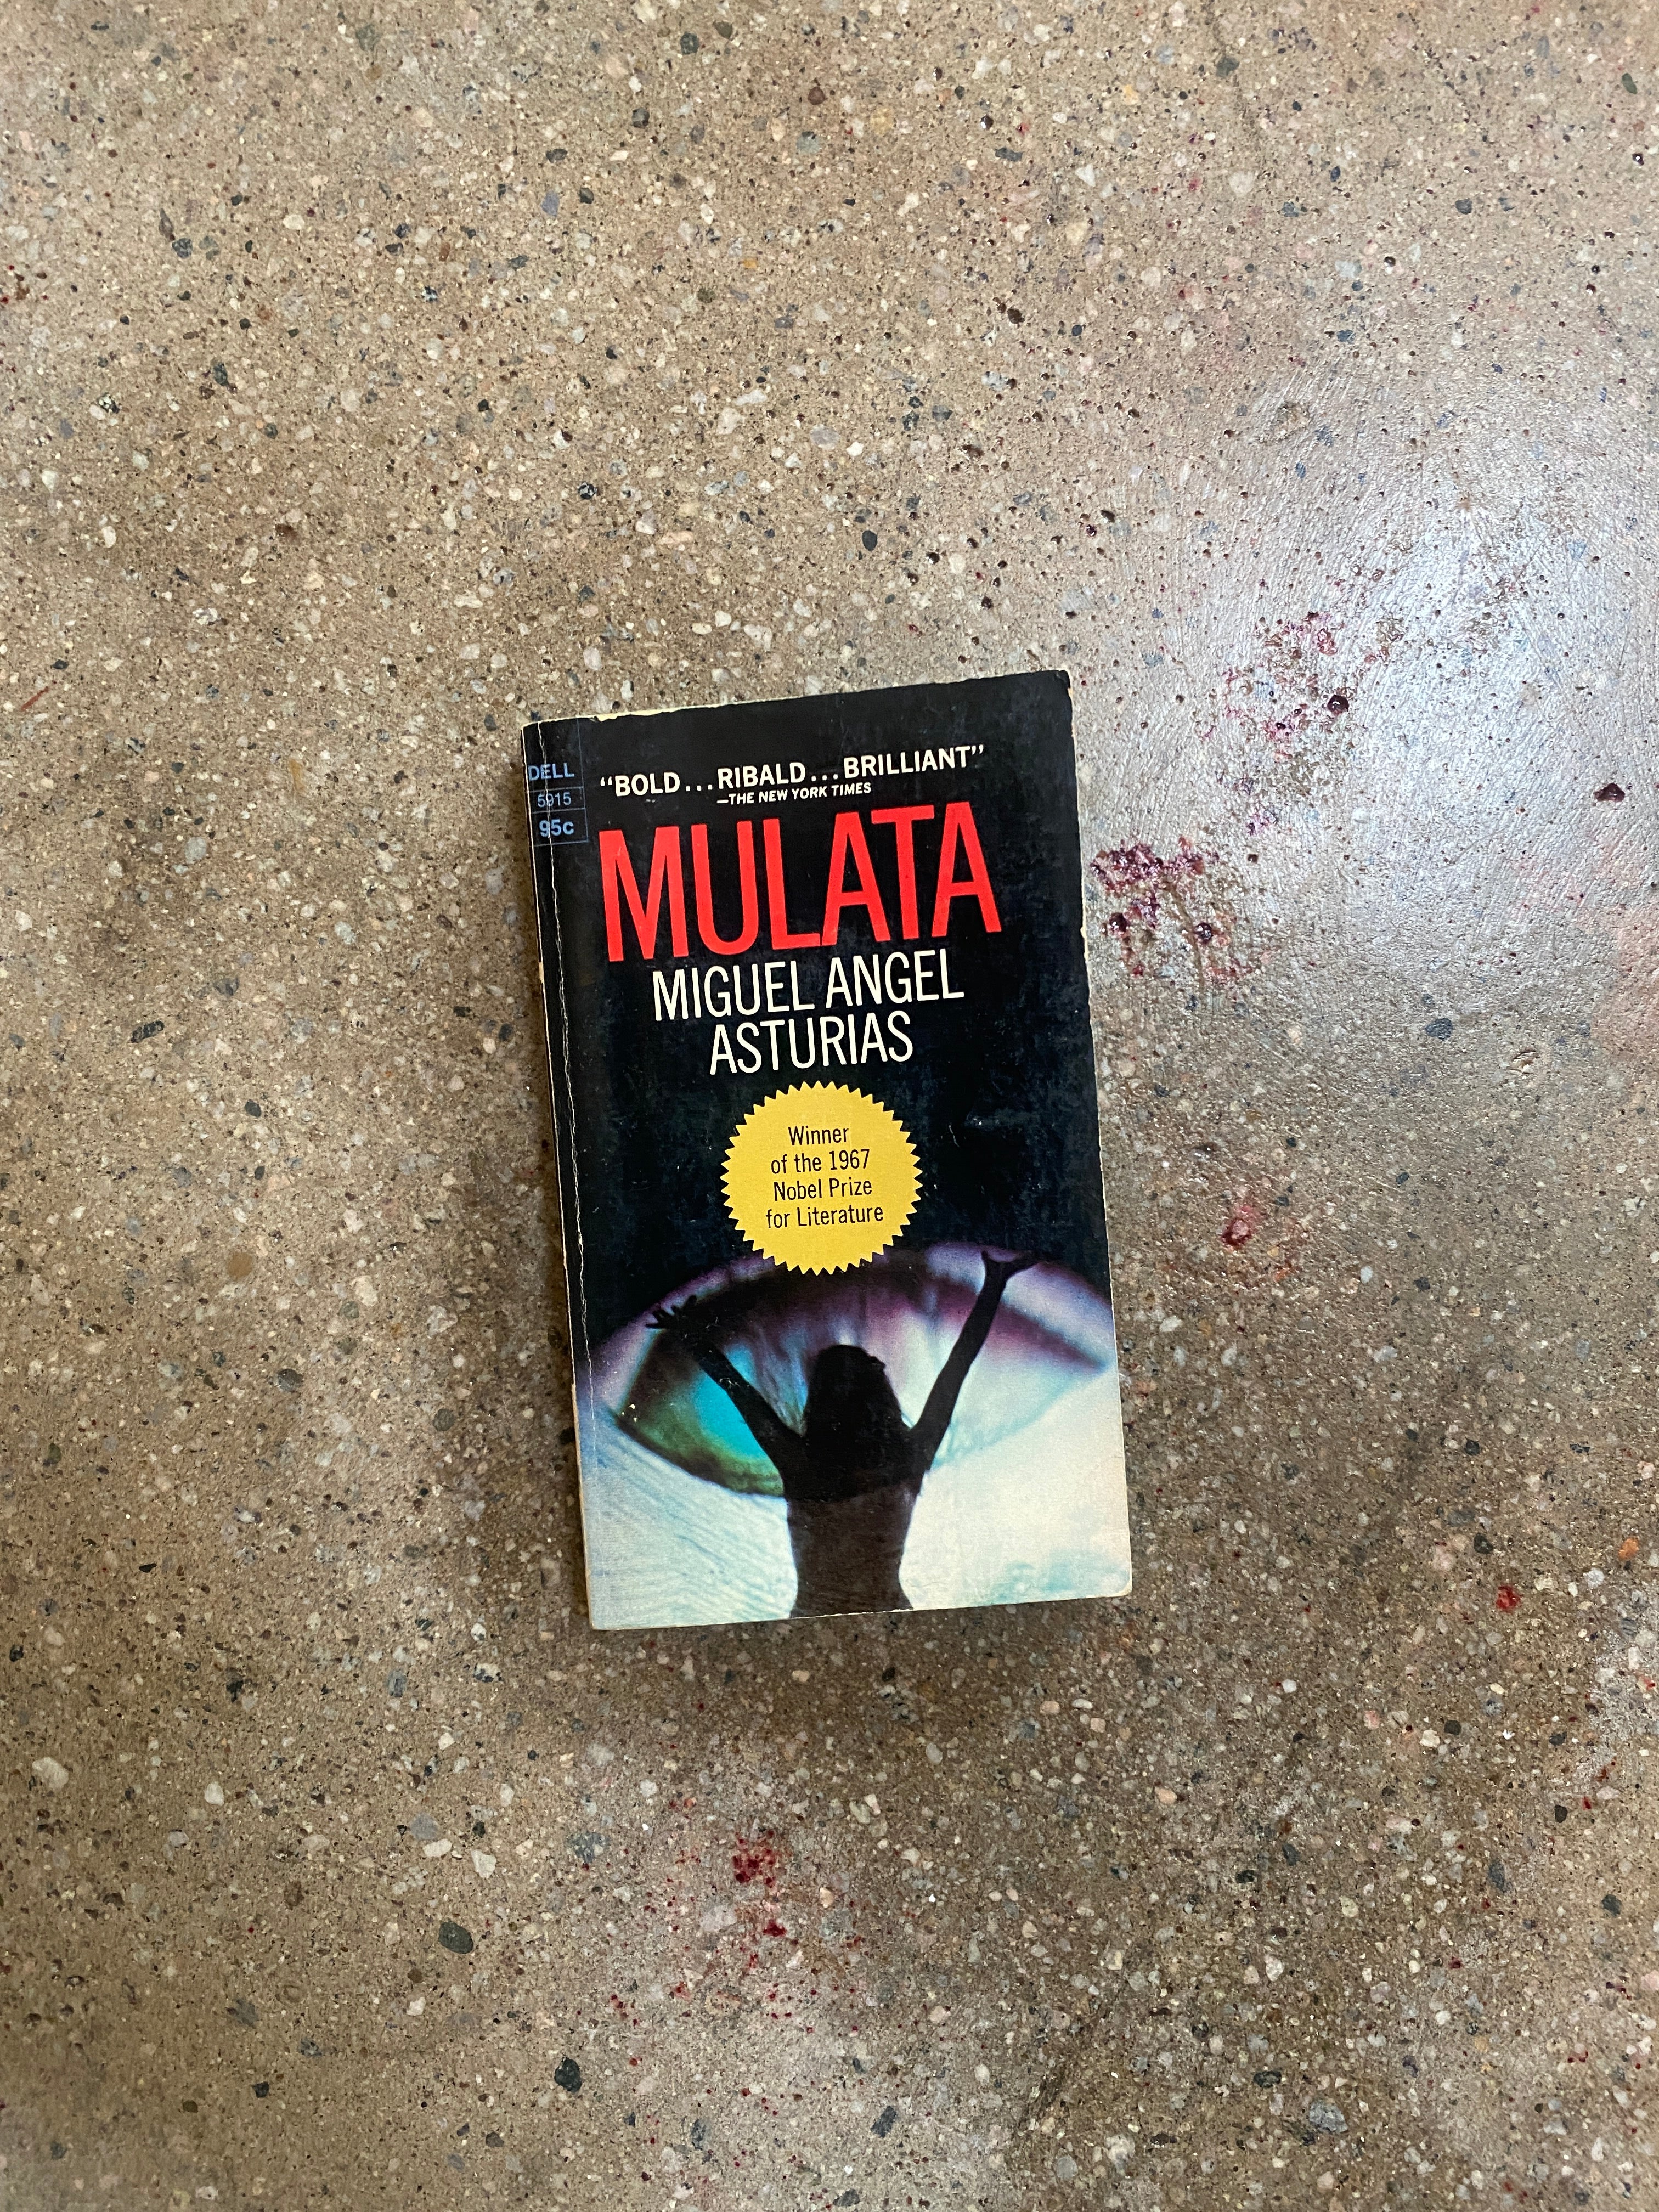 Mulata by Miguel Angel Asturias (1st Printing Dell Paperback)